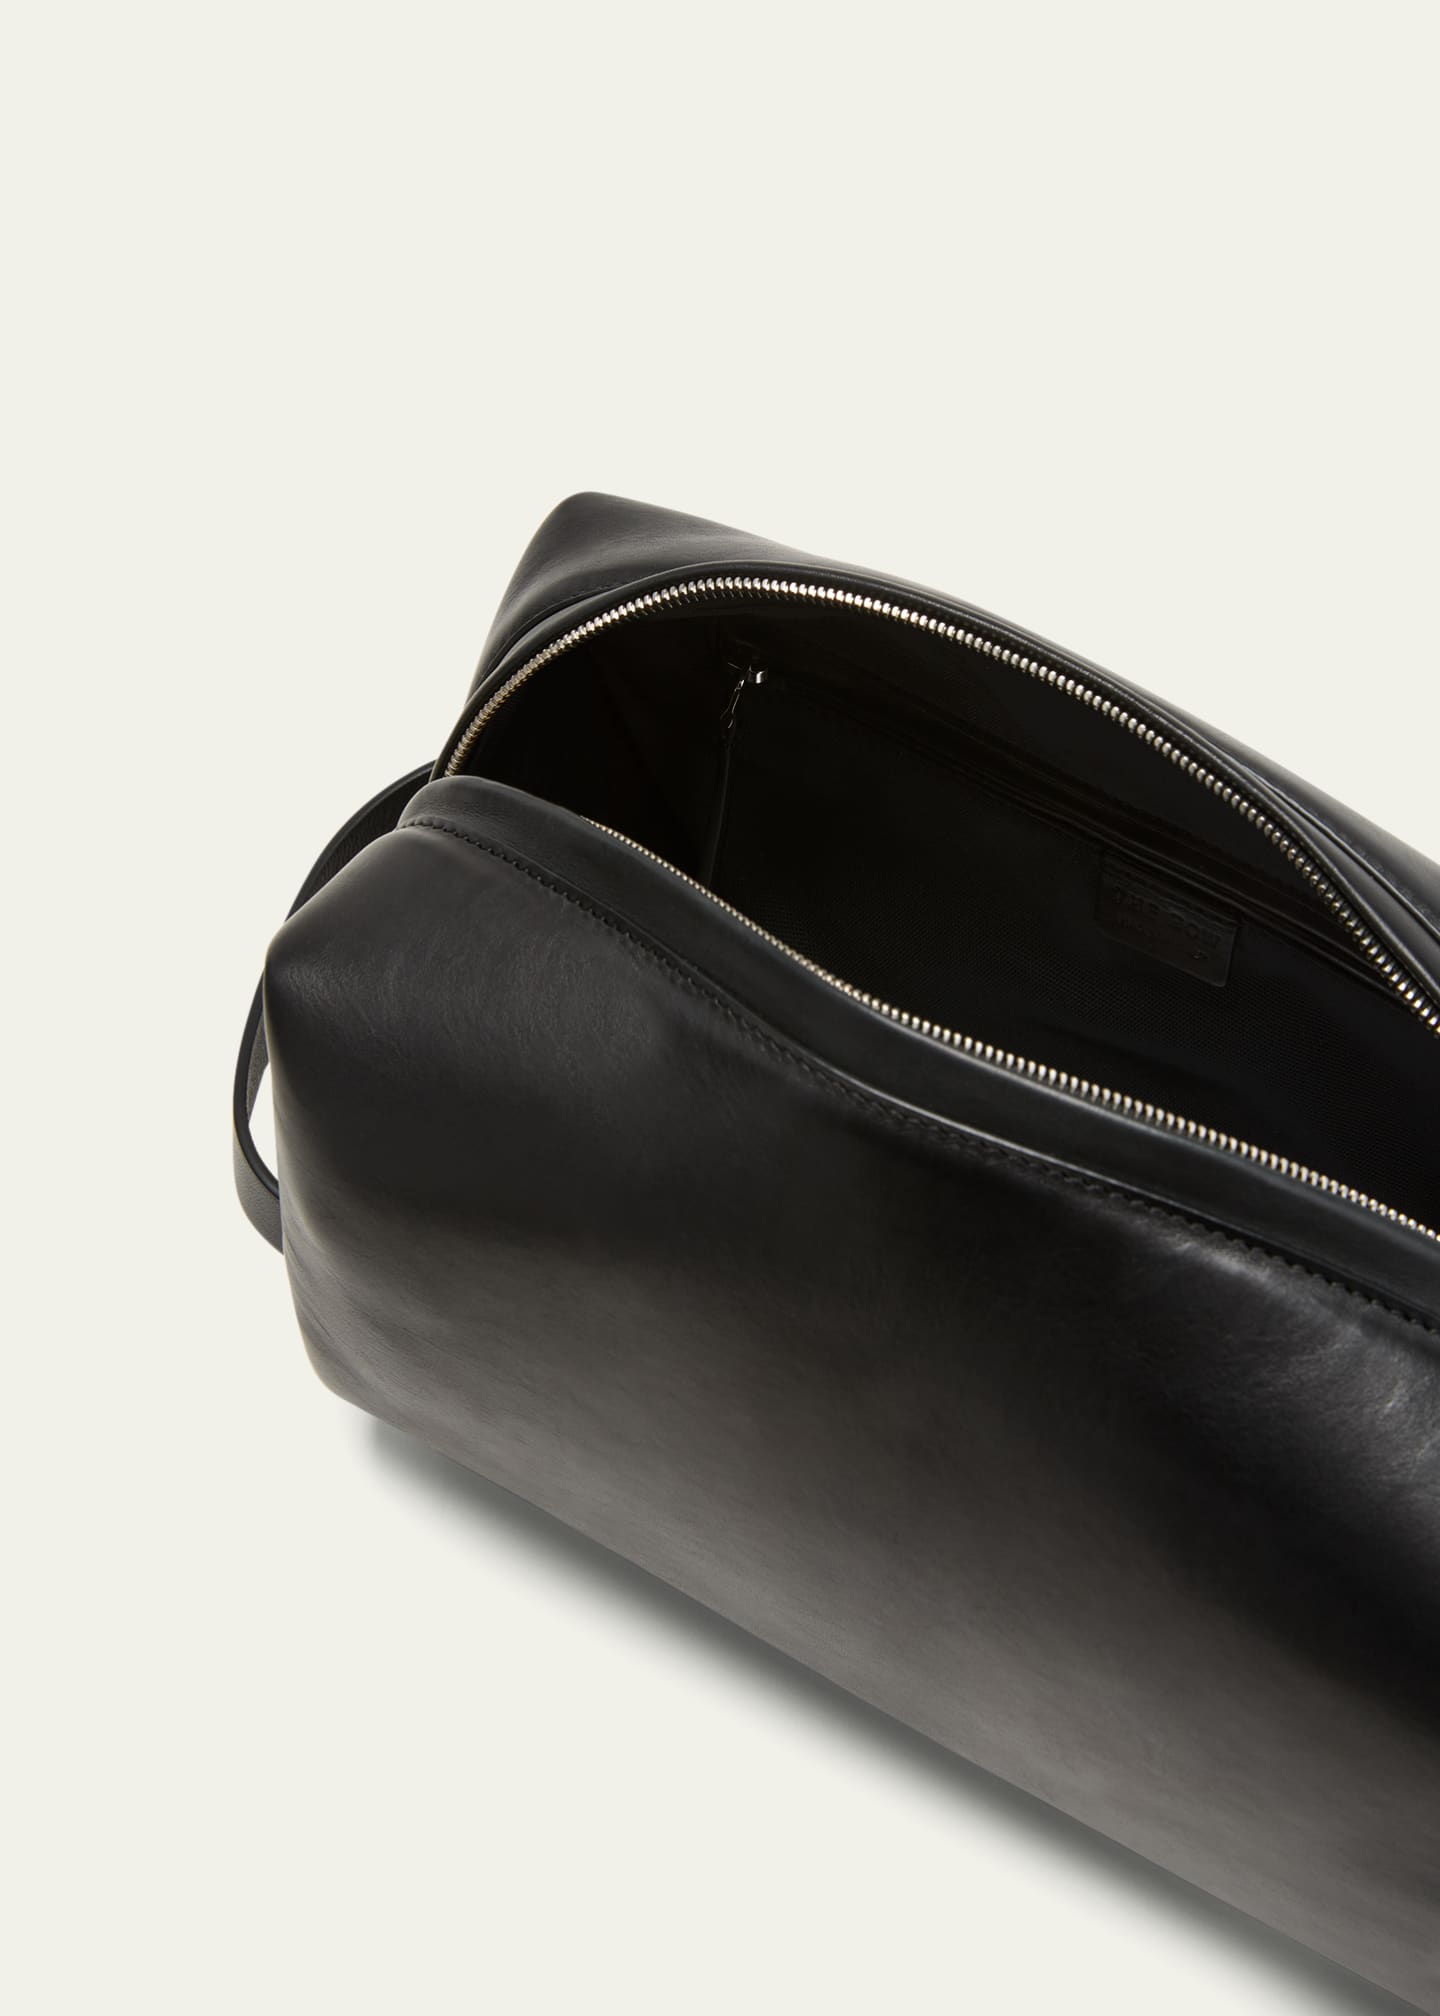 Creed Boutique Leather Wash Bag - Graphite Large